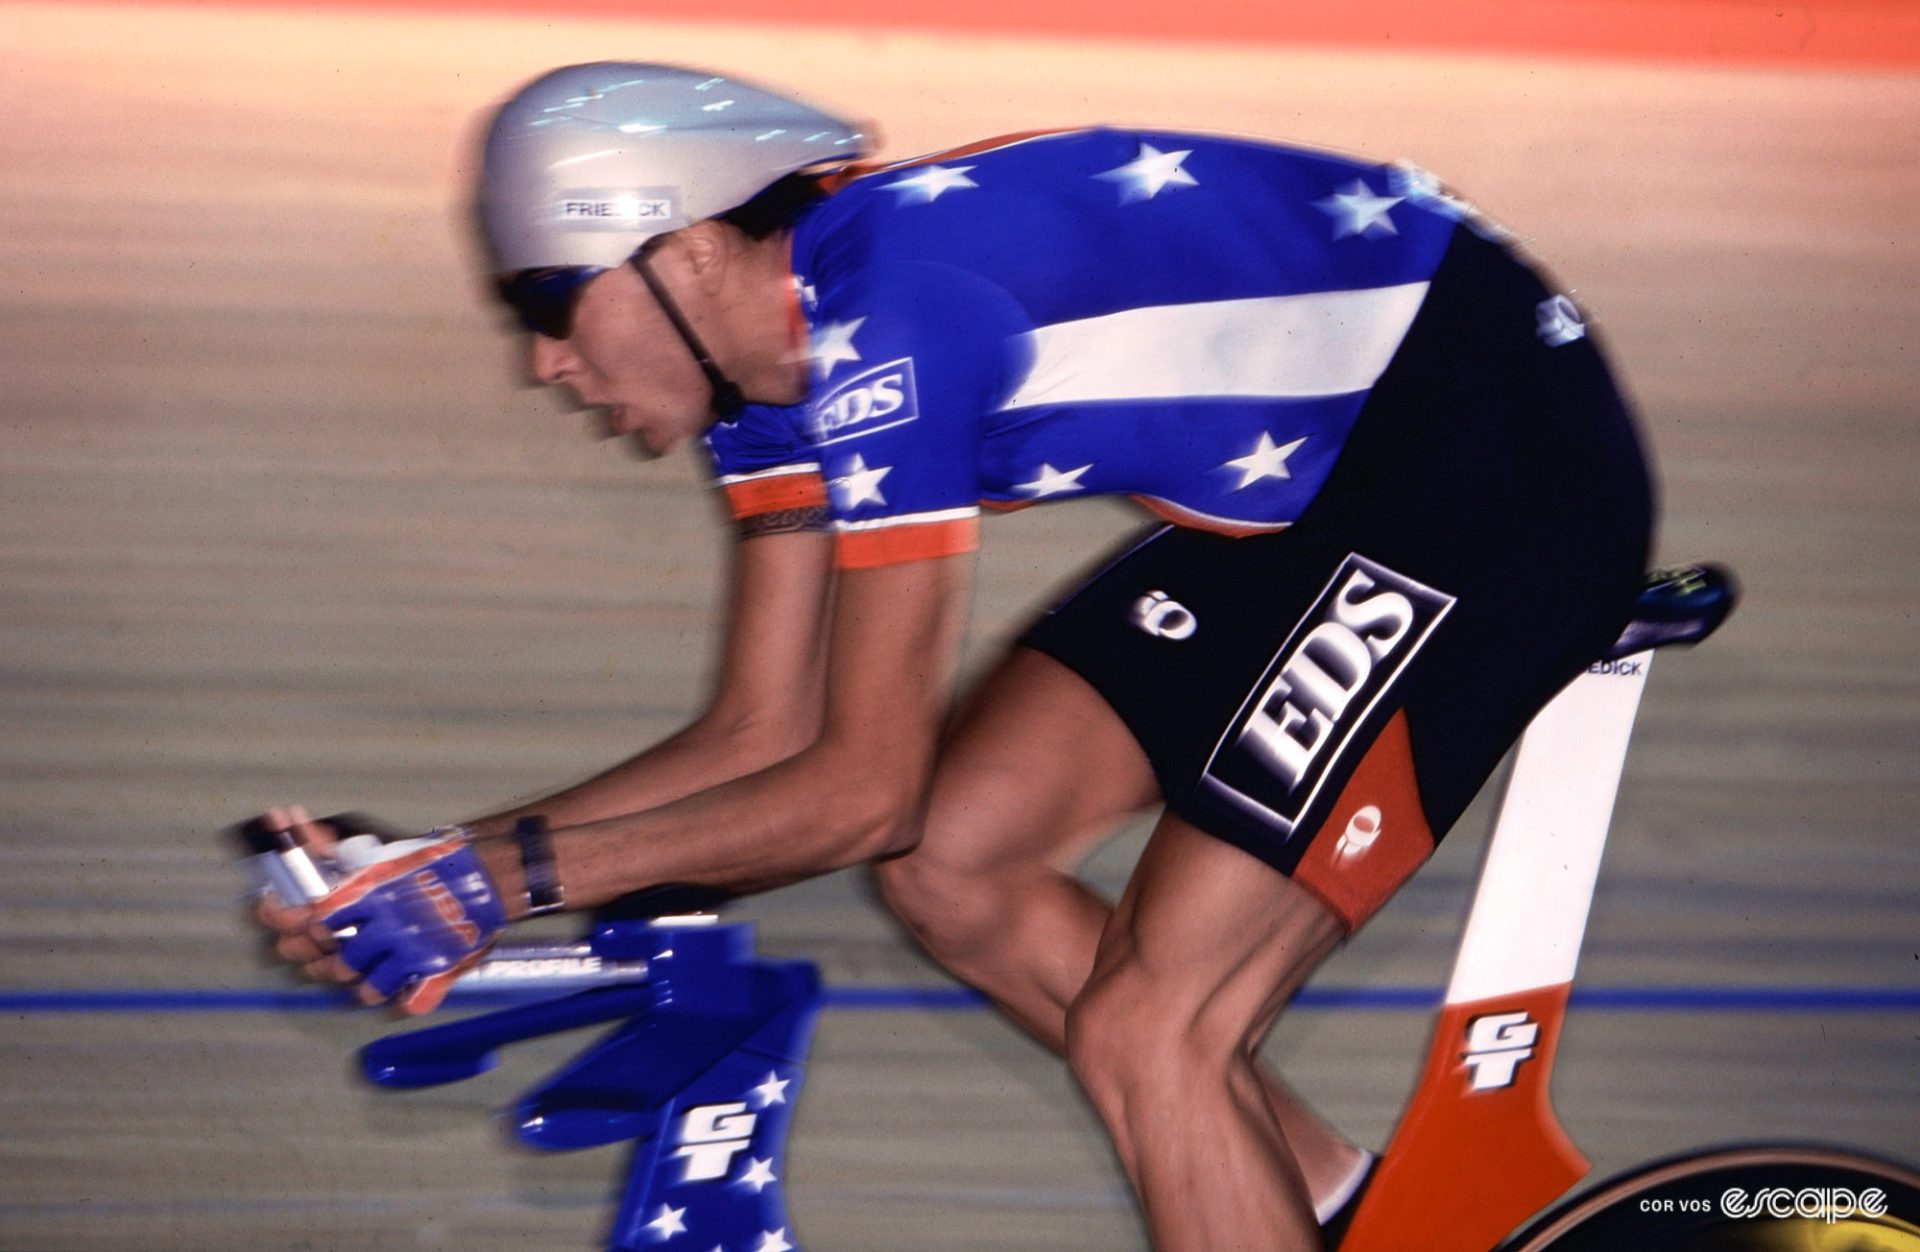 Mariano Friedick on a GT track bike, extreme saddle drop and extreme star-spangled decor. 